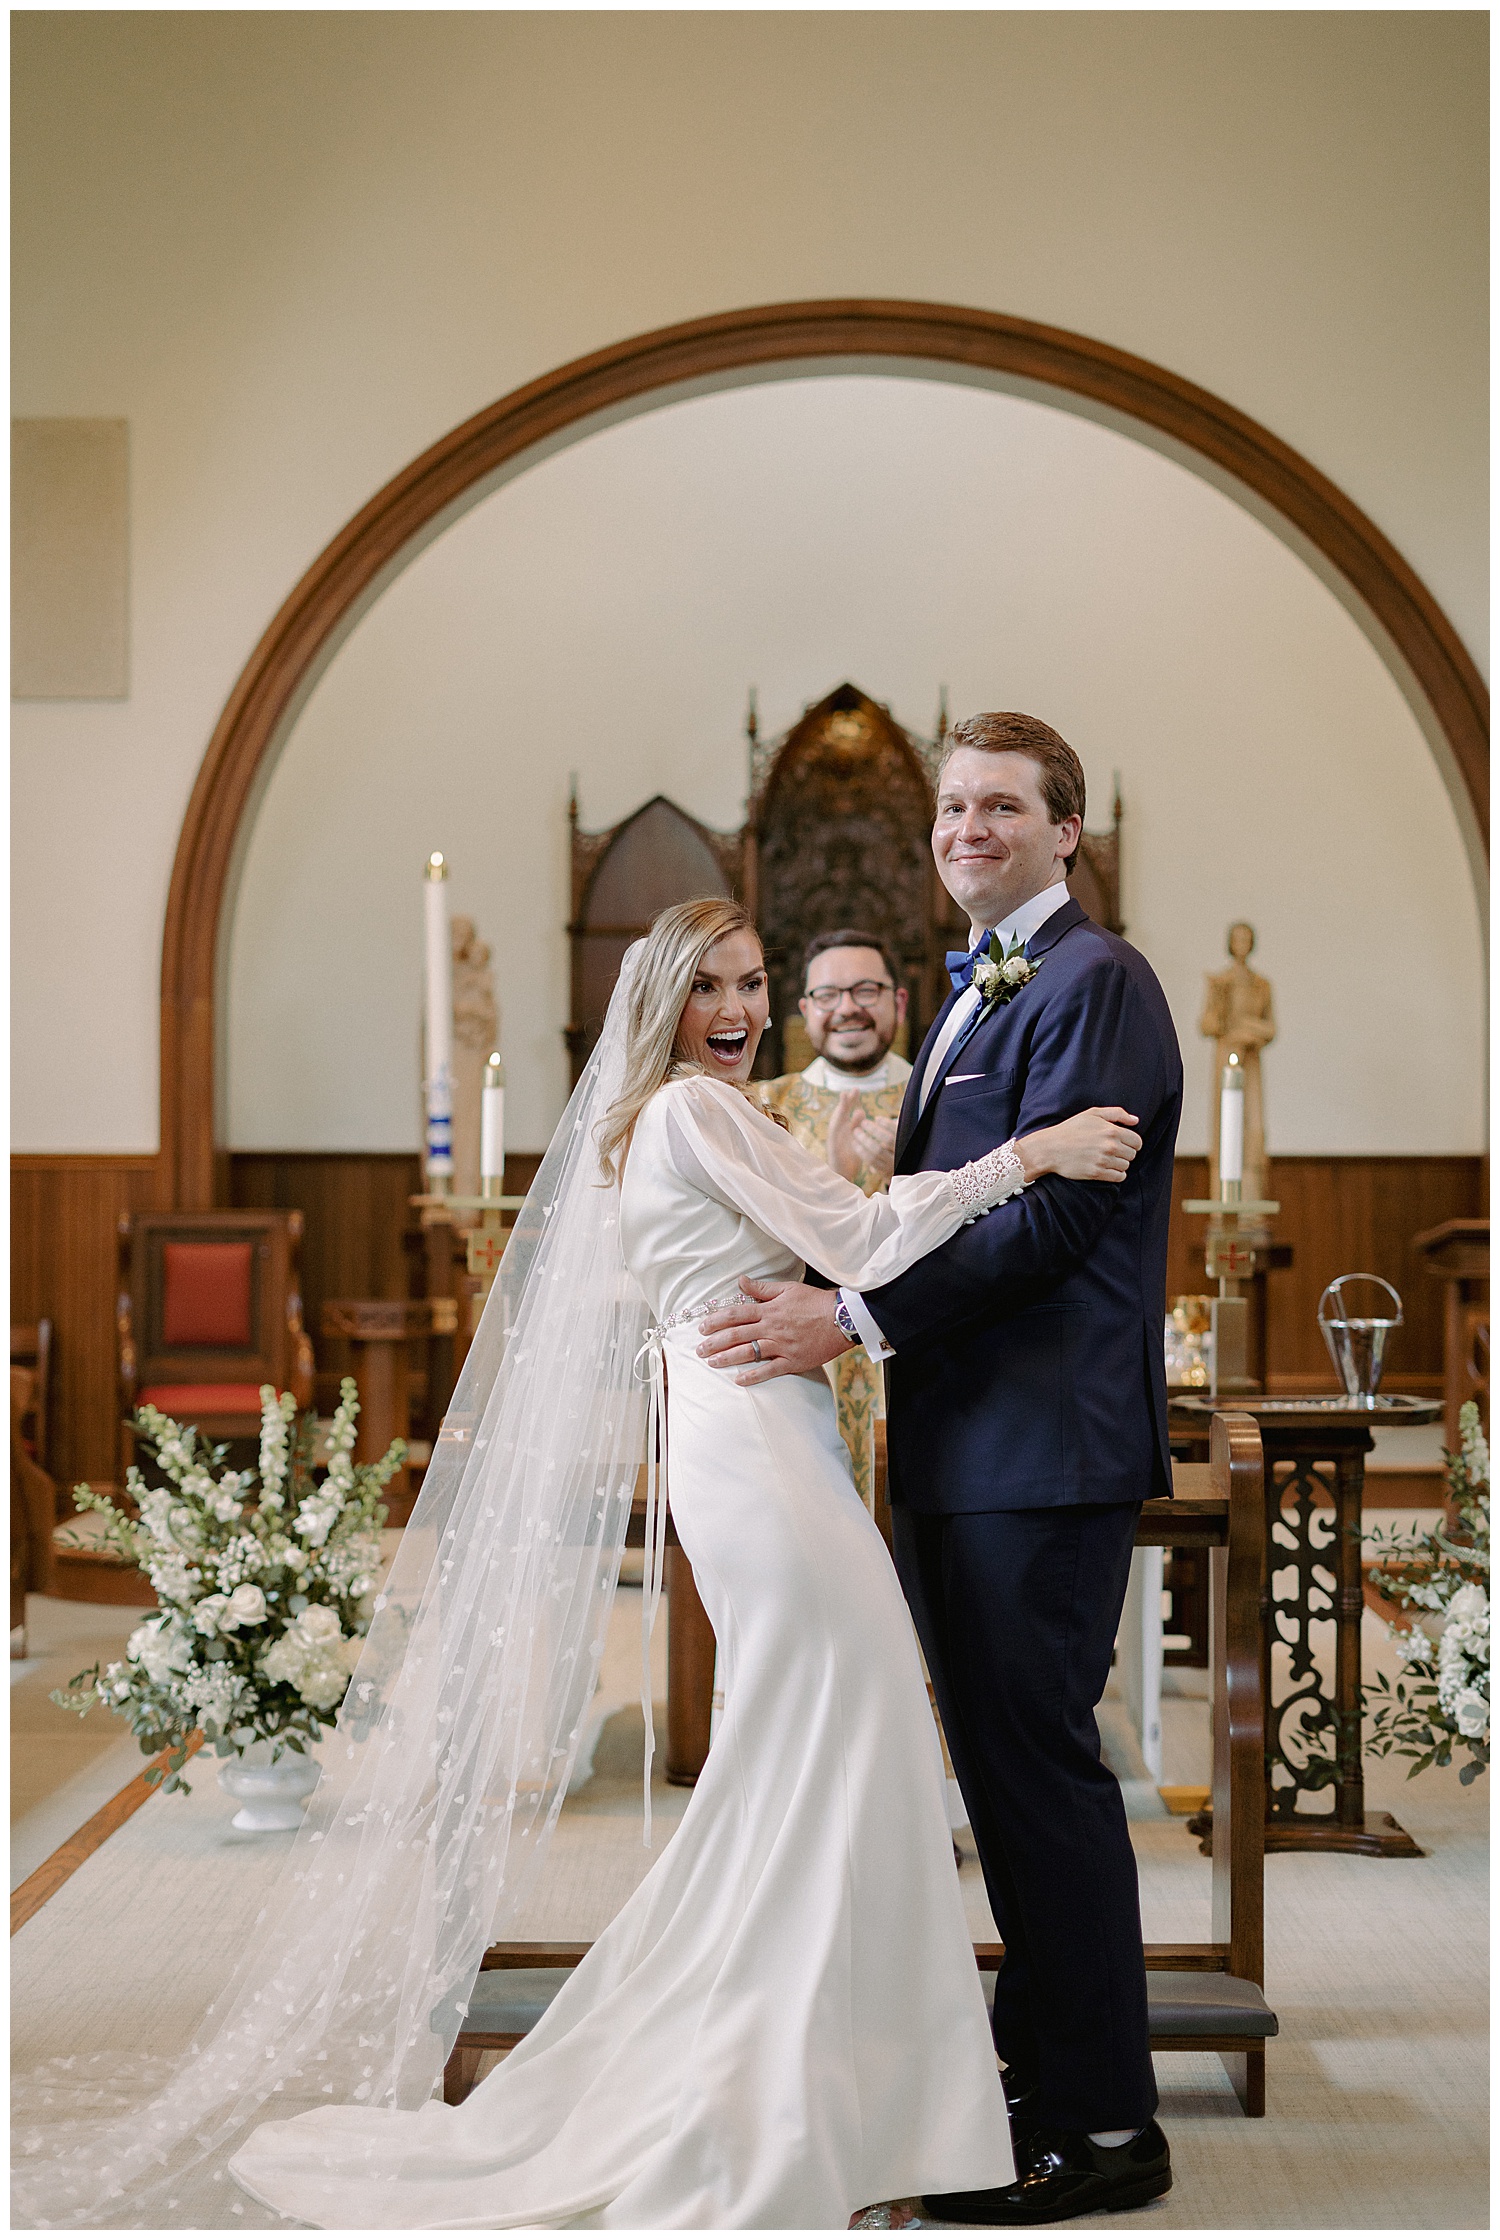 Chic Newport Wedding ceremony at Our Lady of Mercy Chapel in Rhode Island